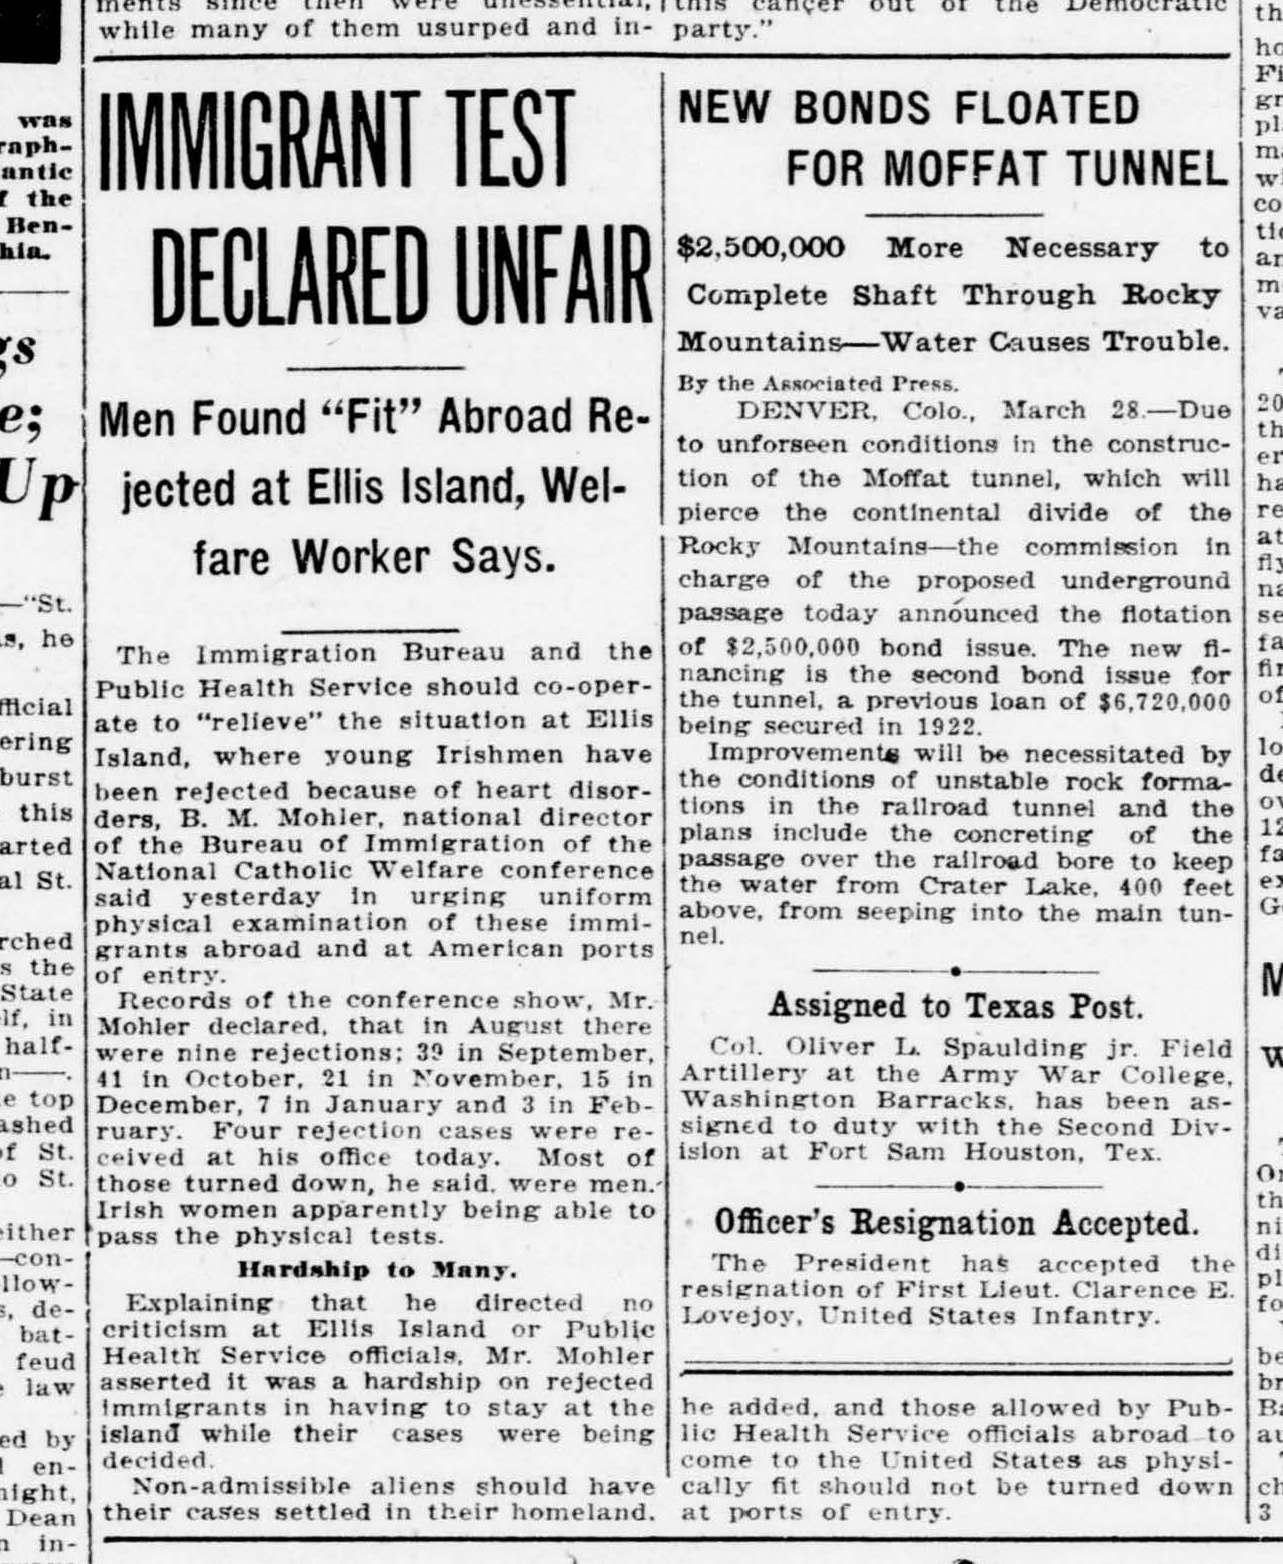 Newspaper article titled: Immigrant test declared unfair: Men found "fit" abroad rejected at Ellis Island, welfare worker says